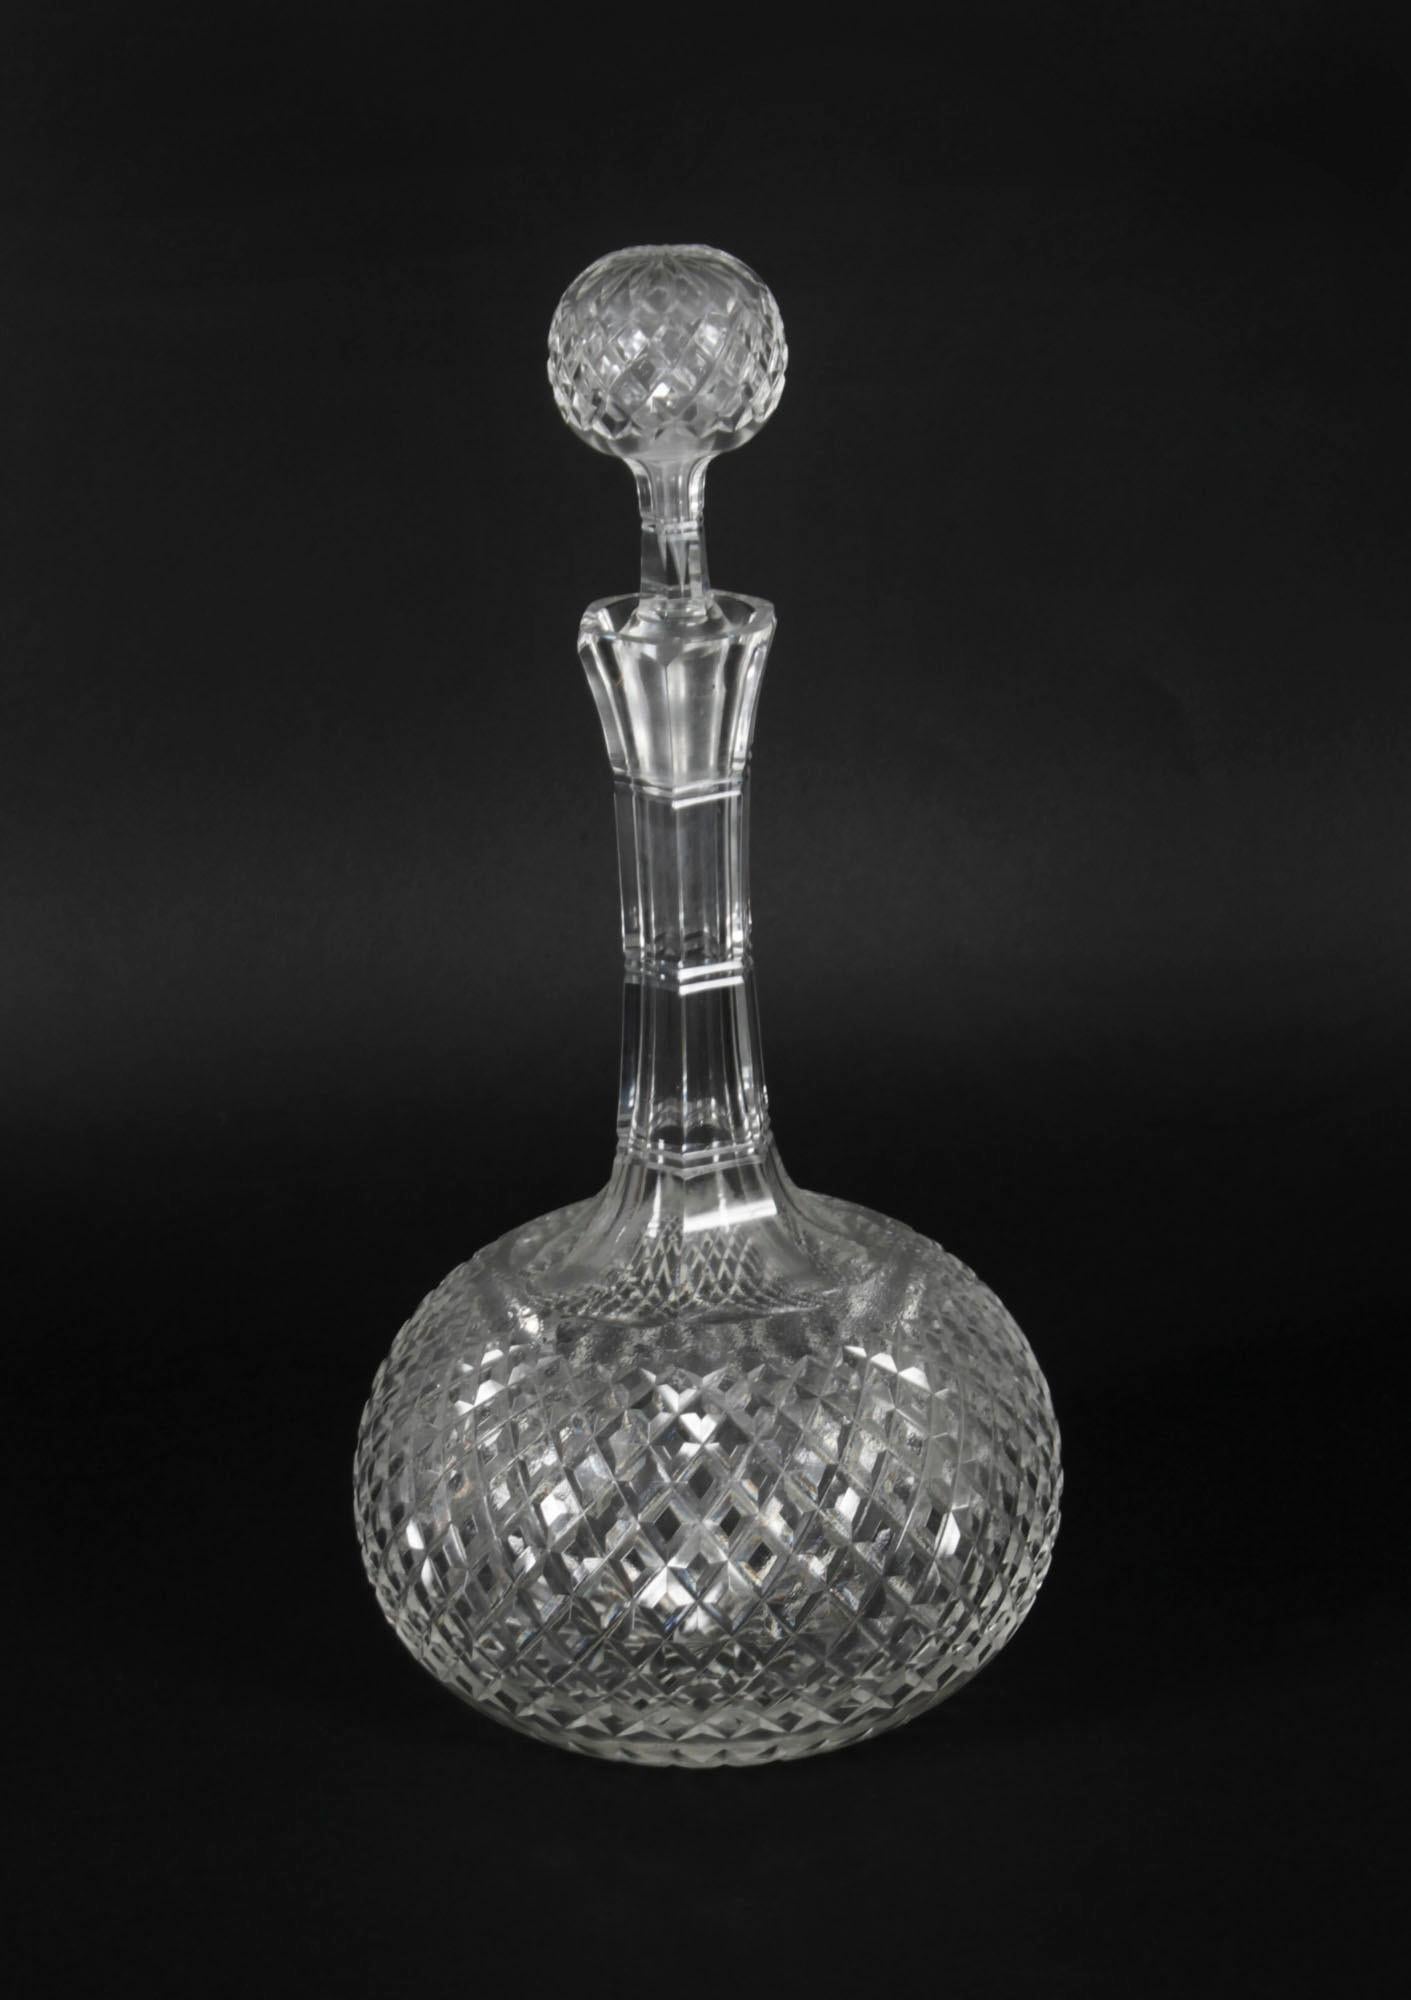 A superb pair of antique etched glass globe decanters, circa 1870 in date.

The fine glass has been beautifully etched with a fine leaf pattern.

This lovely pair can serve decorative as well as practical purposes.

Add an elegant touch to your next